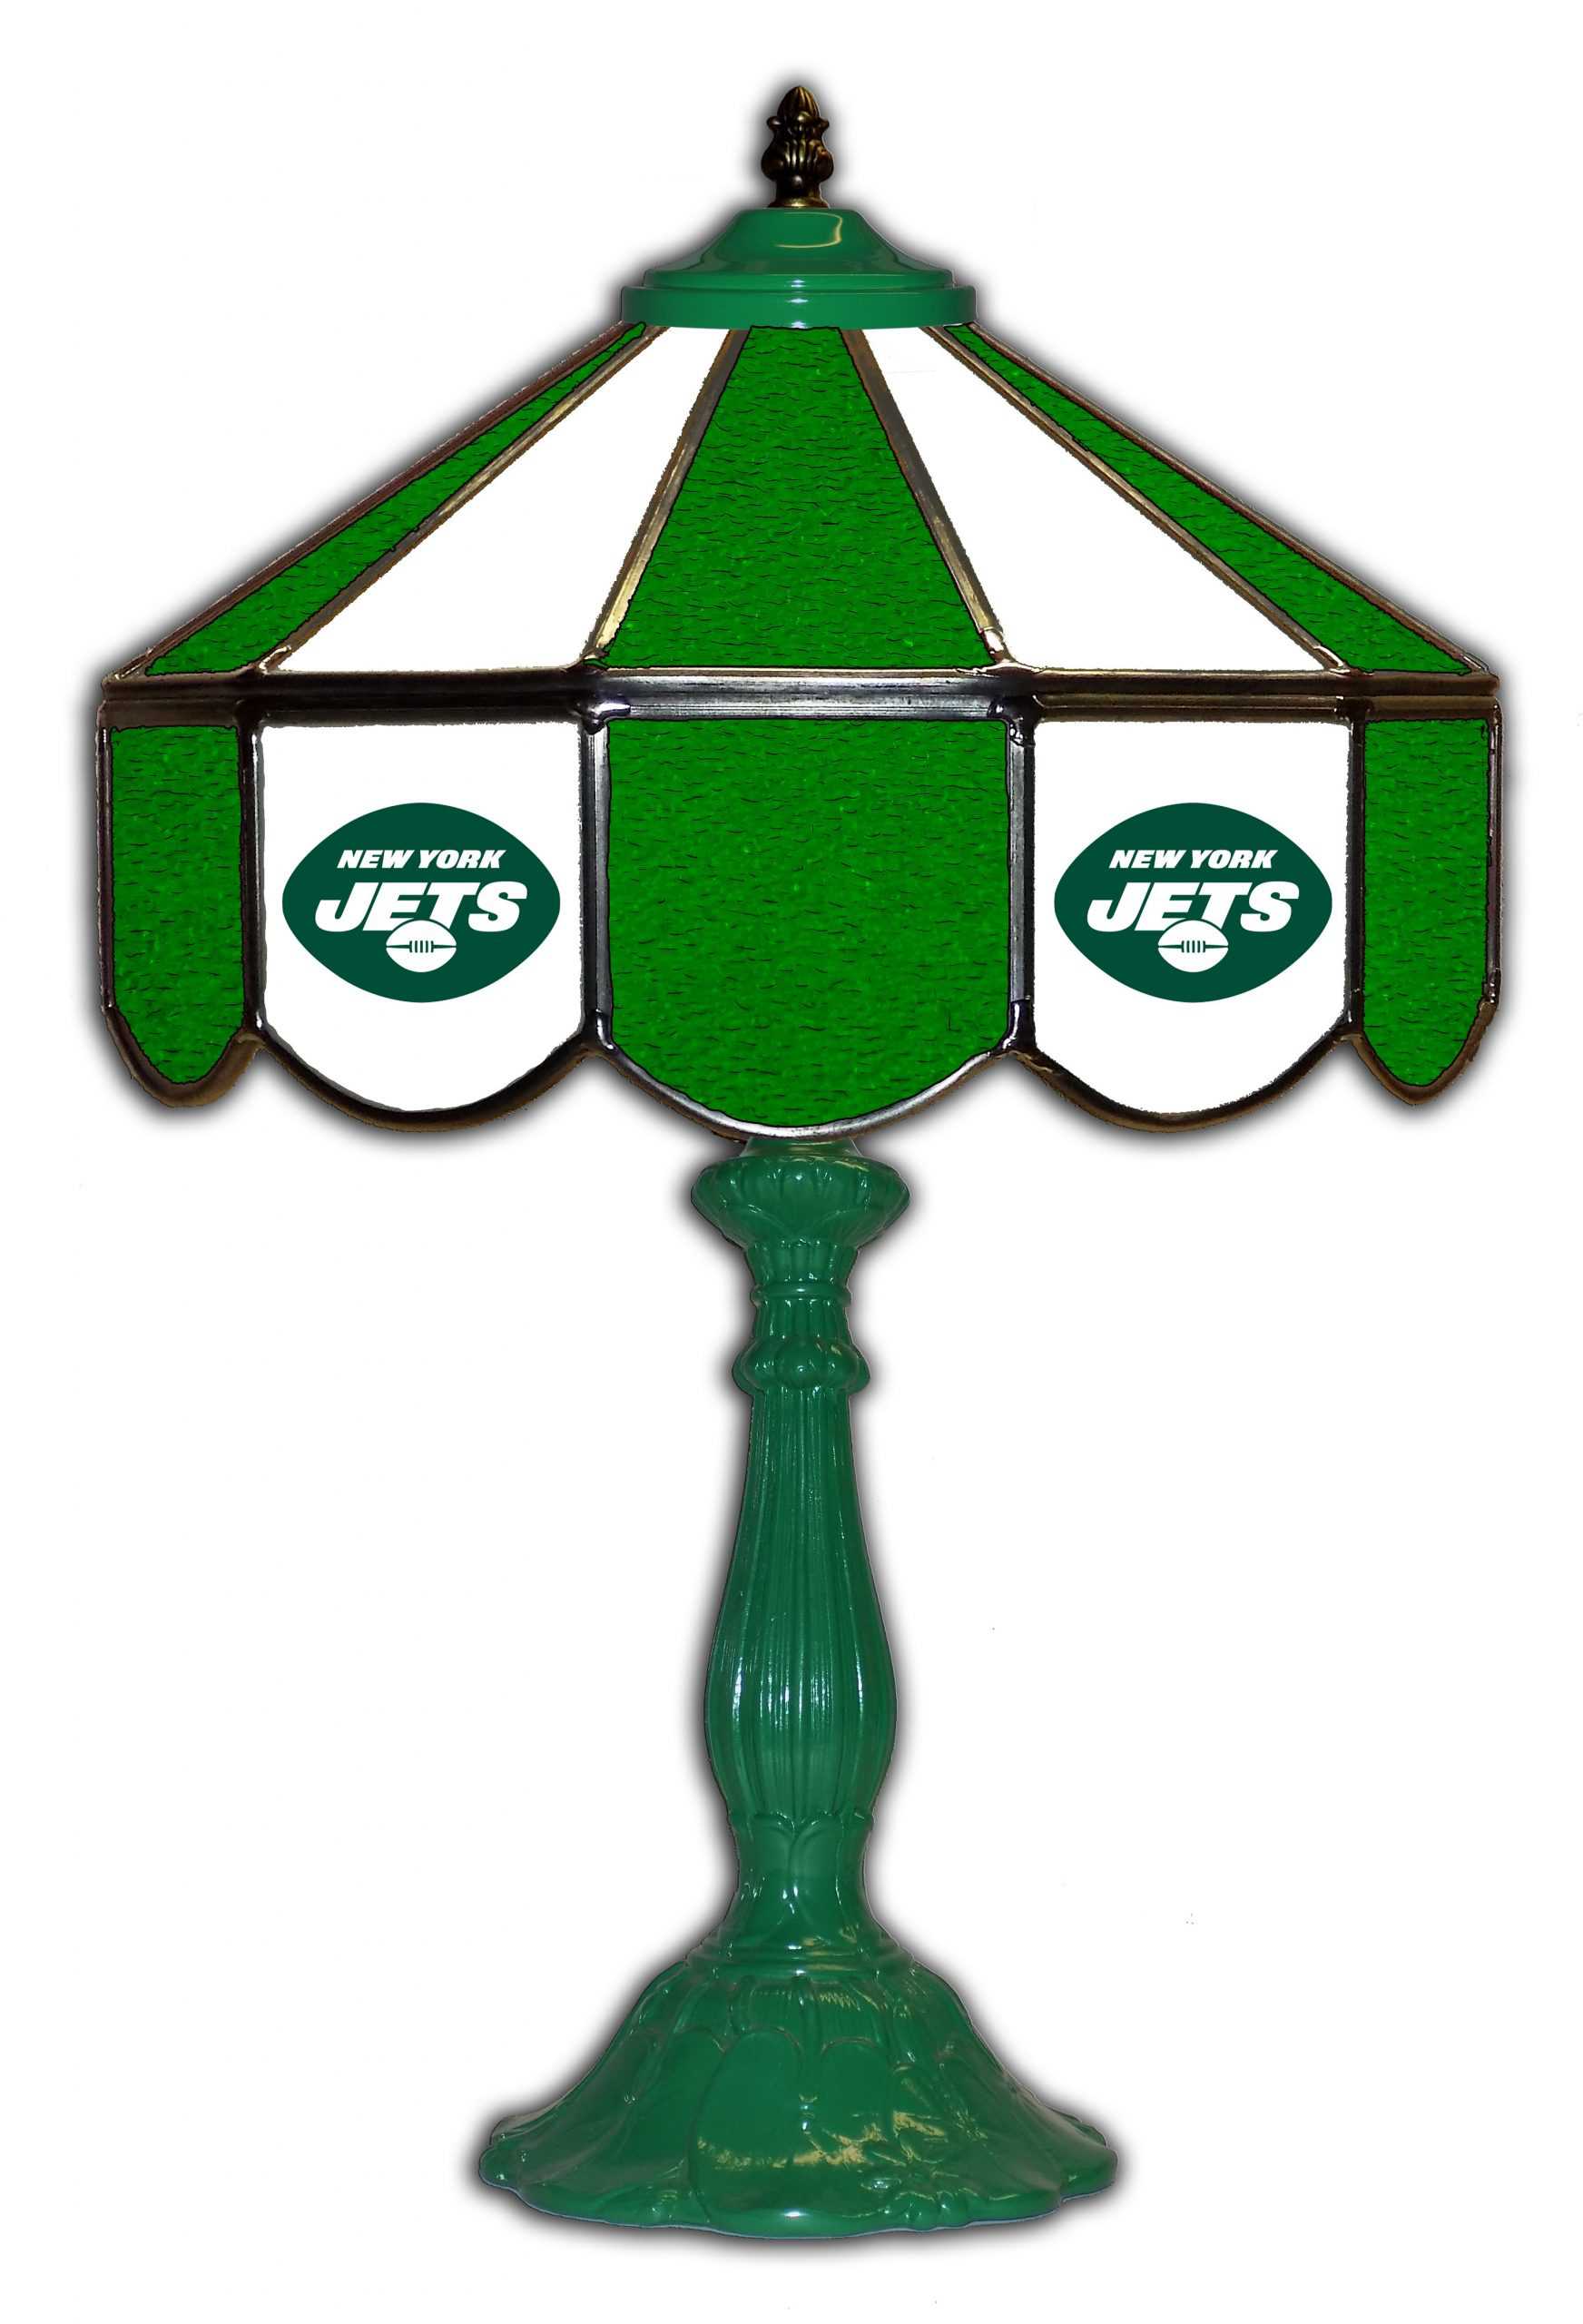 NEW YORK JETS 21" GLASS TABLE LAMP